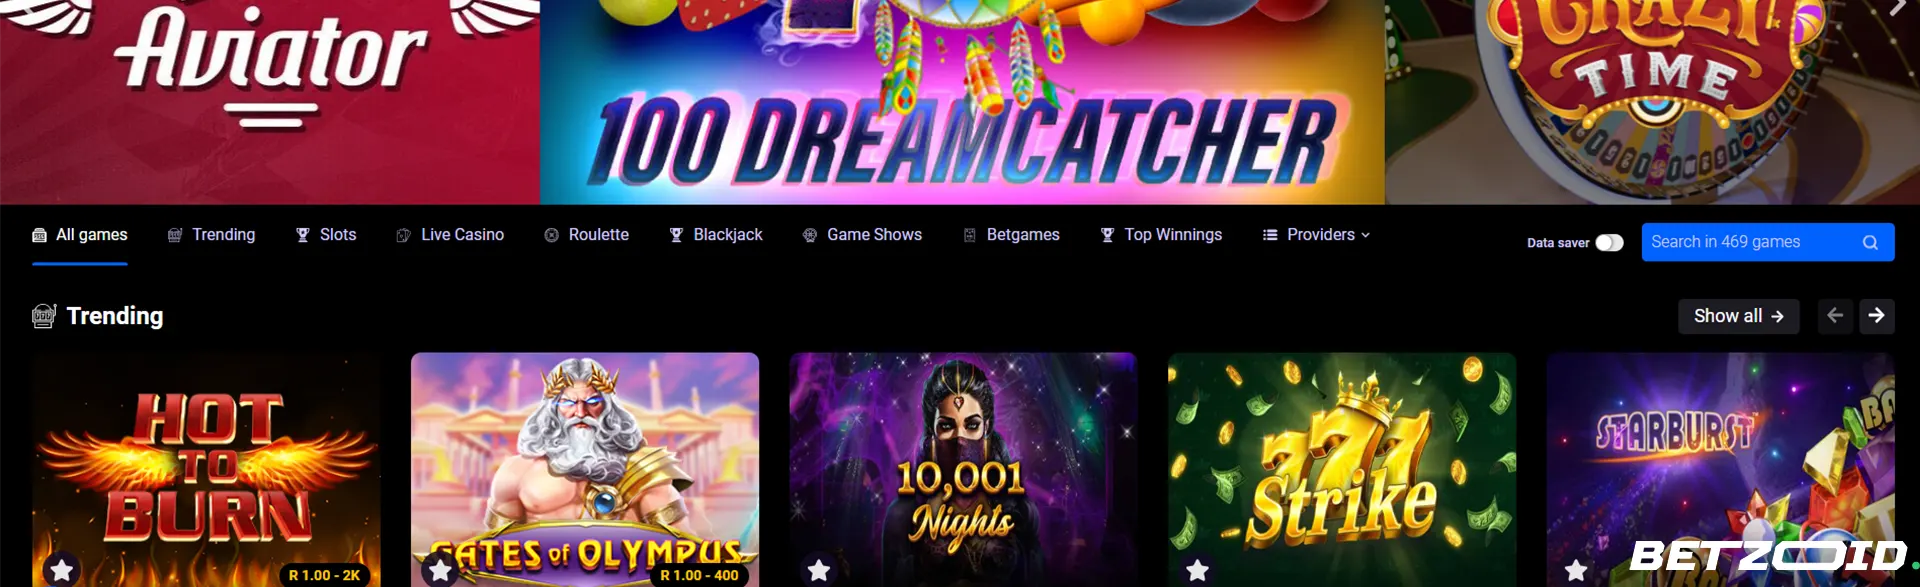 Betxchange casino review - overview of games and features.